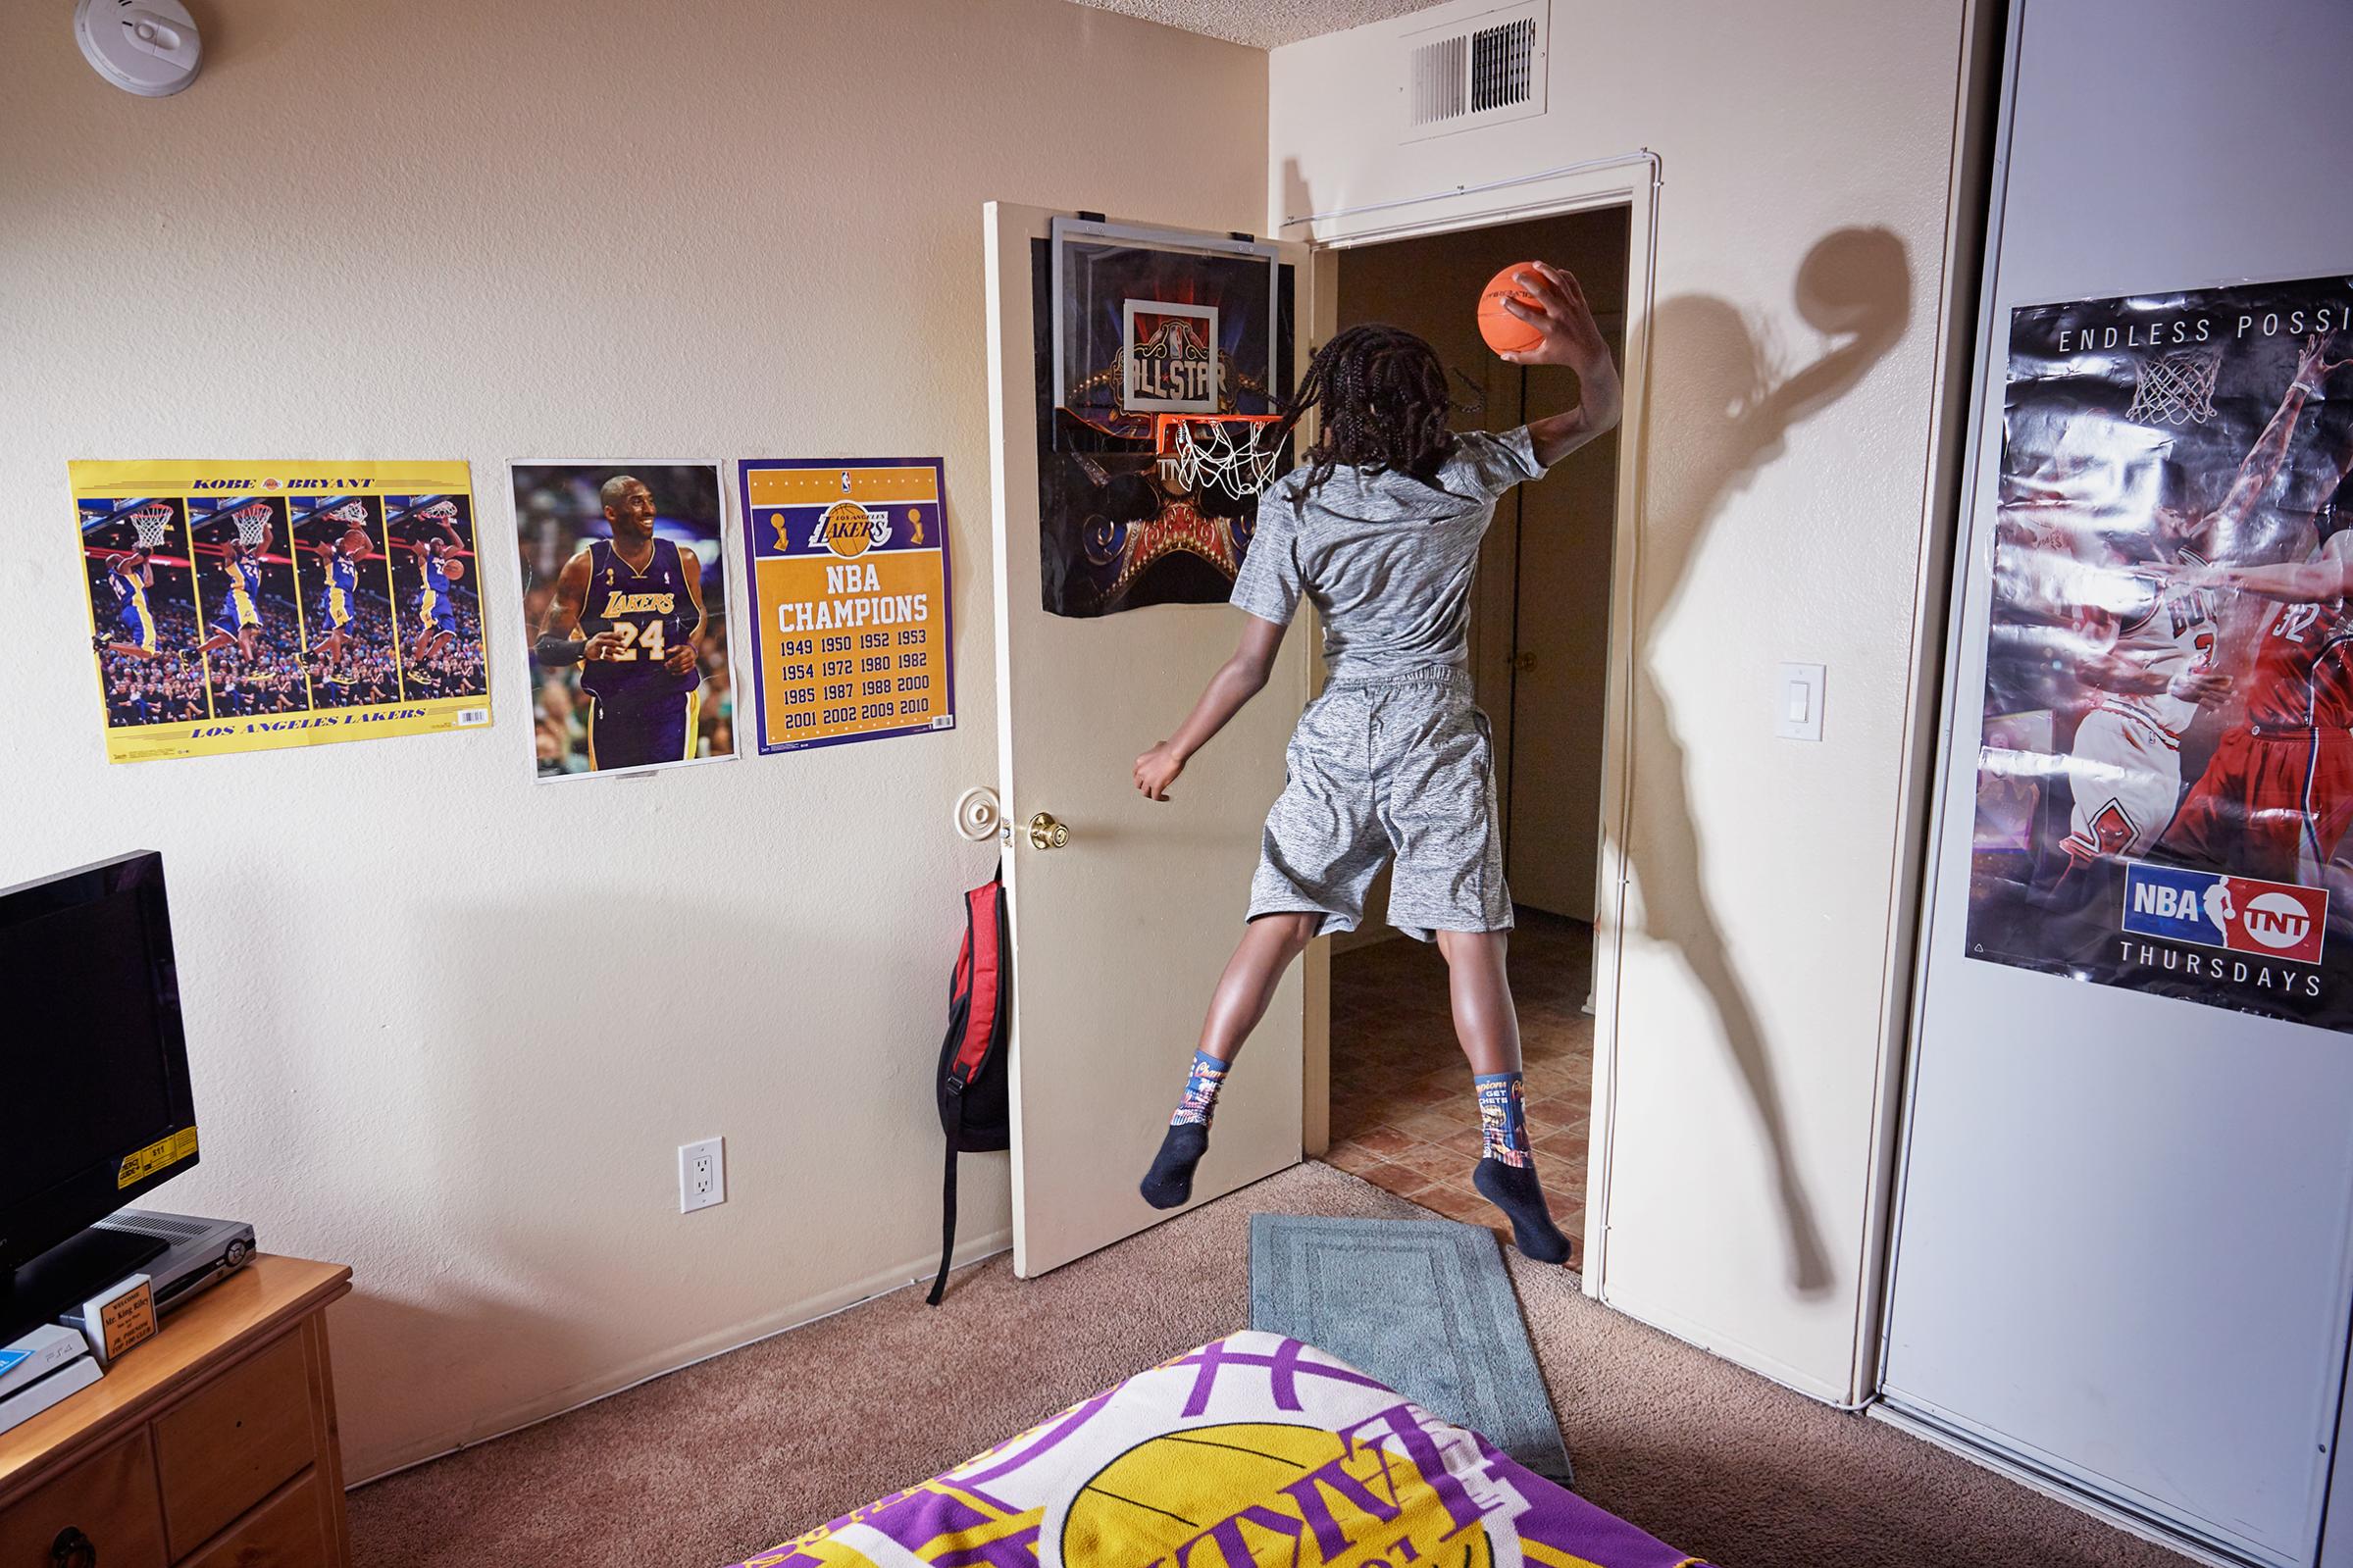 King-Riley Owens, 9, who is ranked as a five-star prospect by the National Youth Basketball Report, lives in L.A. but has already played in tournaments in Utah, Texas and Nevada. His parents have used GoFundMe to help pay for the travel. If the NBA doesn’t work out, King-Riley wants to be a veterinarian. Here King-Rily is photographed at home on Aug. 2, 2017